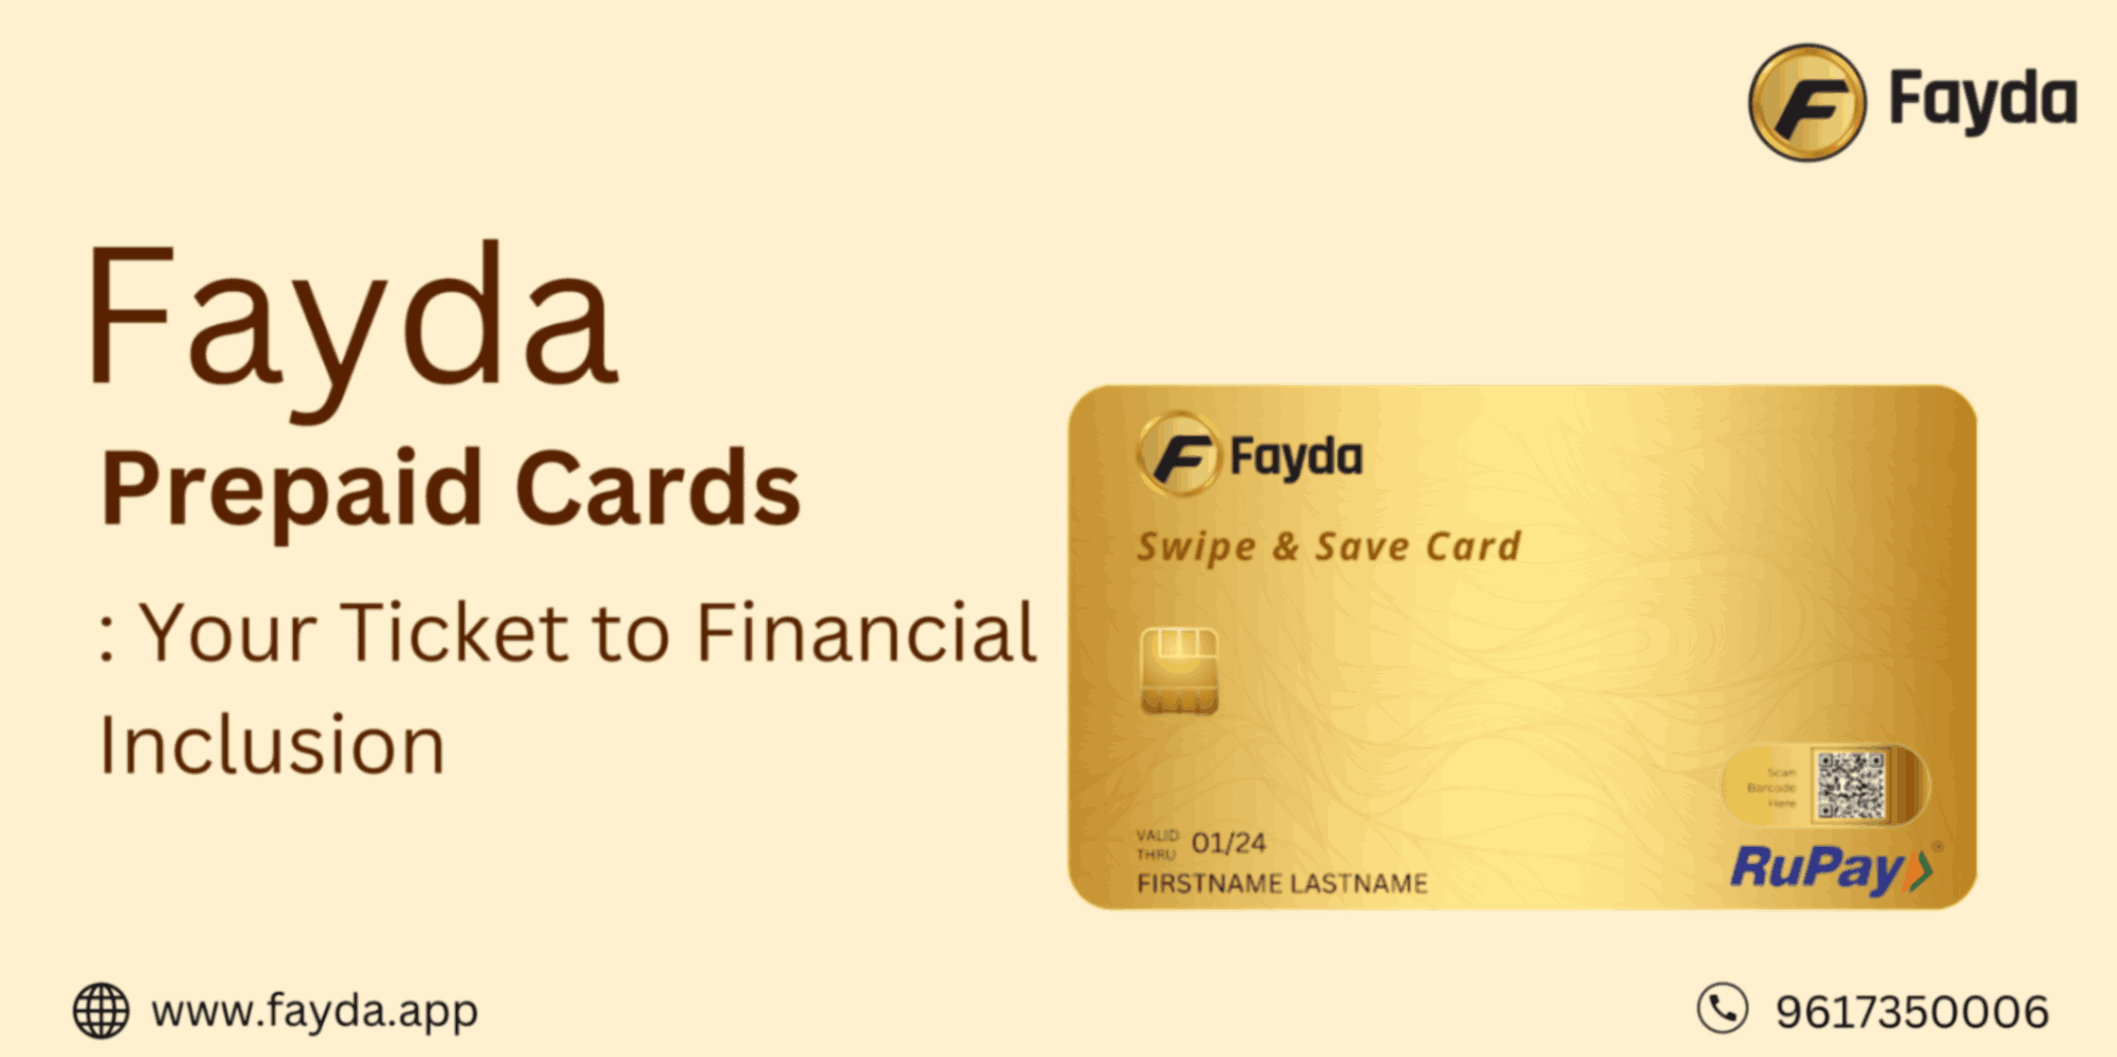 Fayda Prepaid Card: Your Ticket to Financial Inclusion